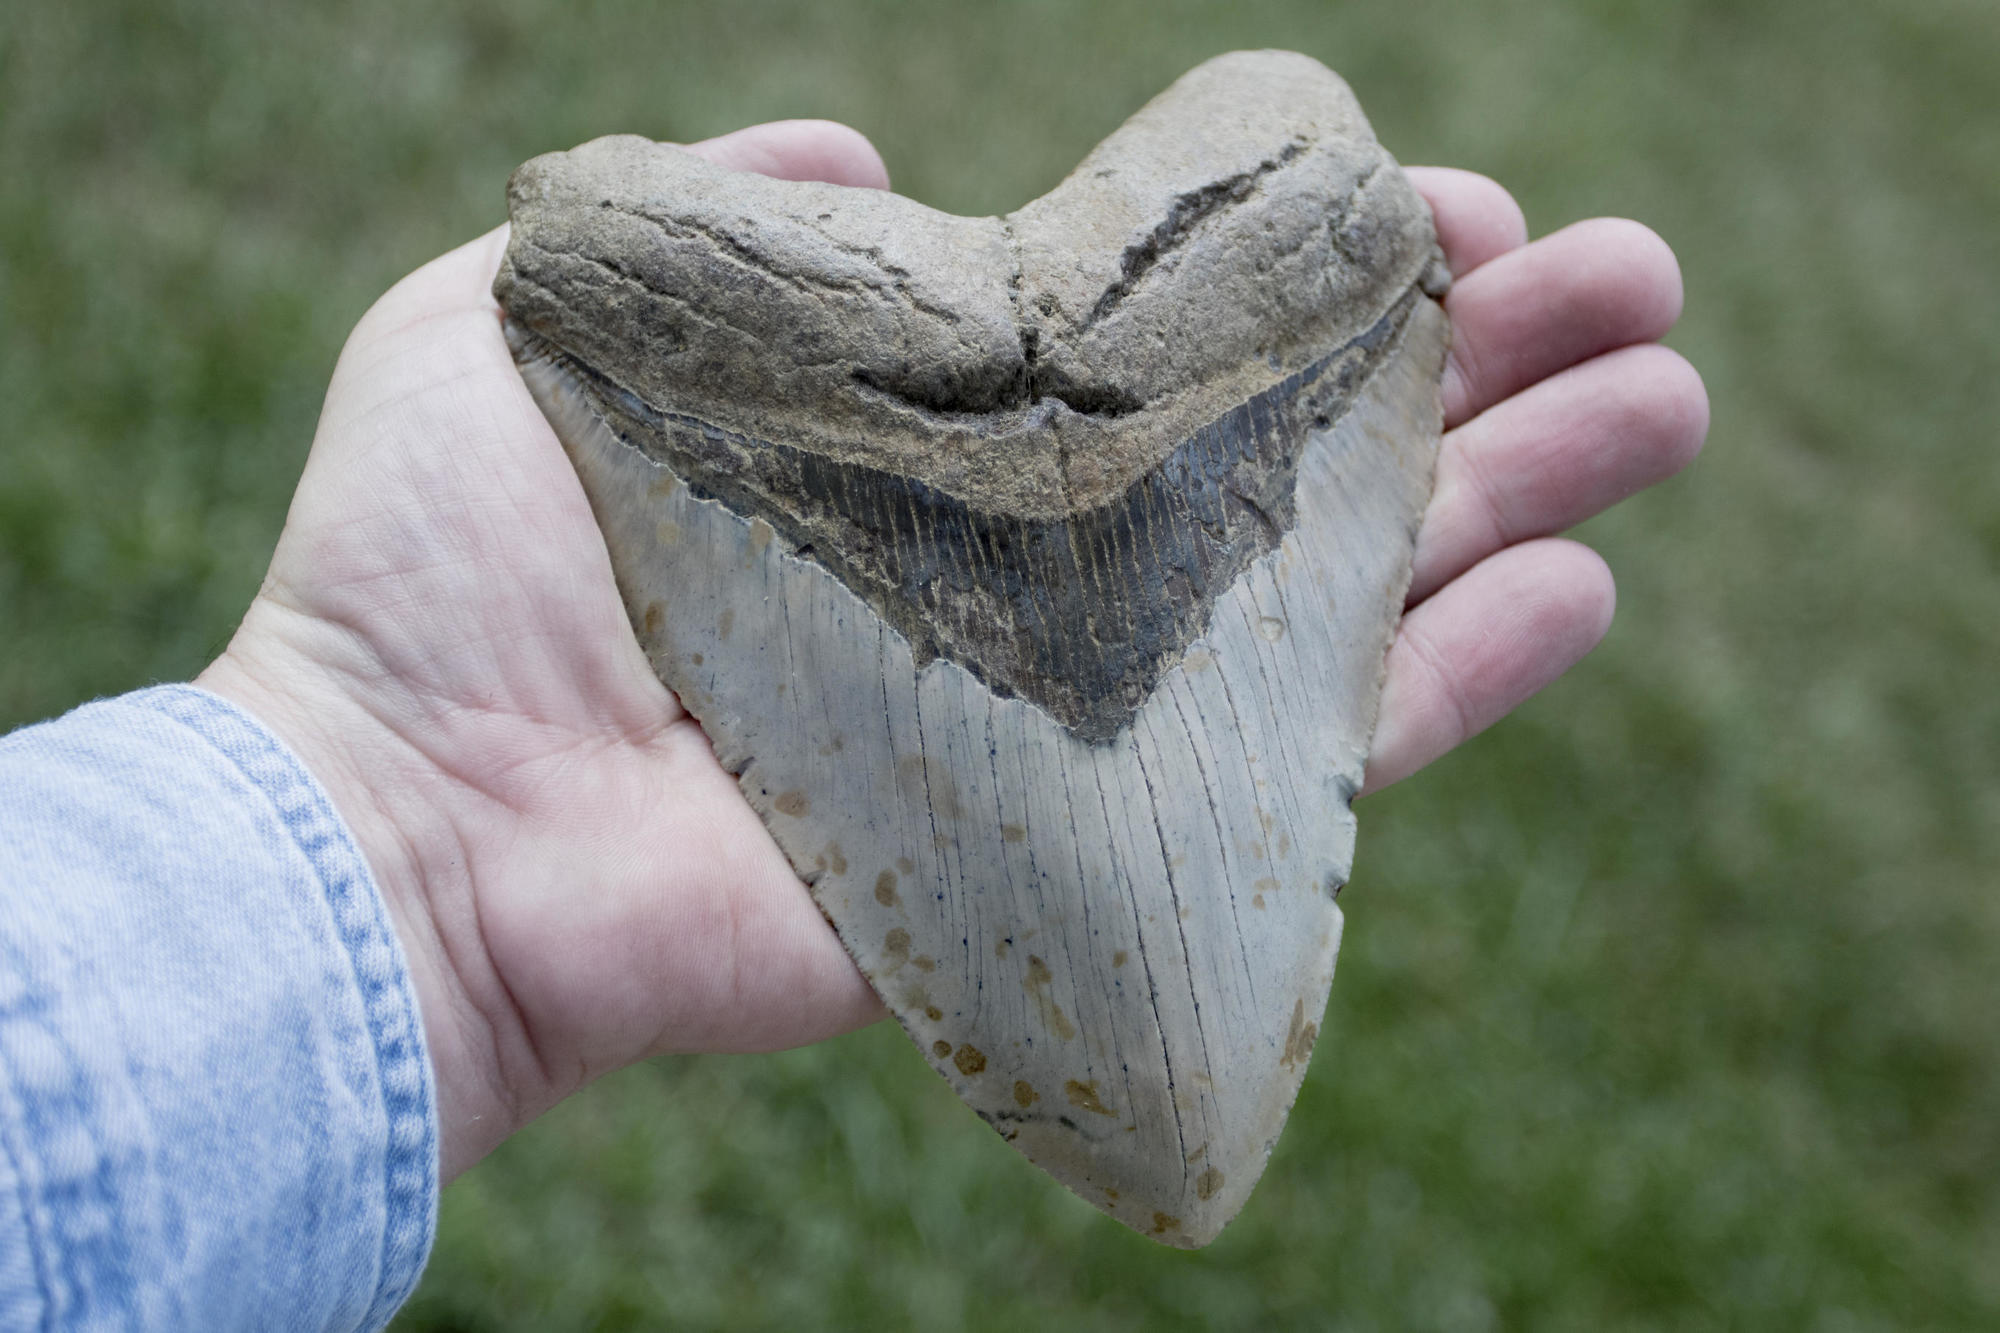 A fossilized tooth belonging to a Megalodon, a prehistoric shark that lived during the Cenozoic Era.